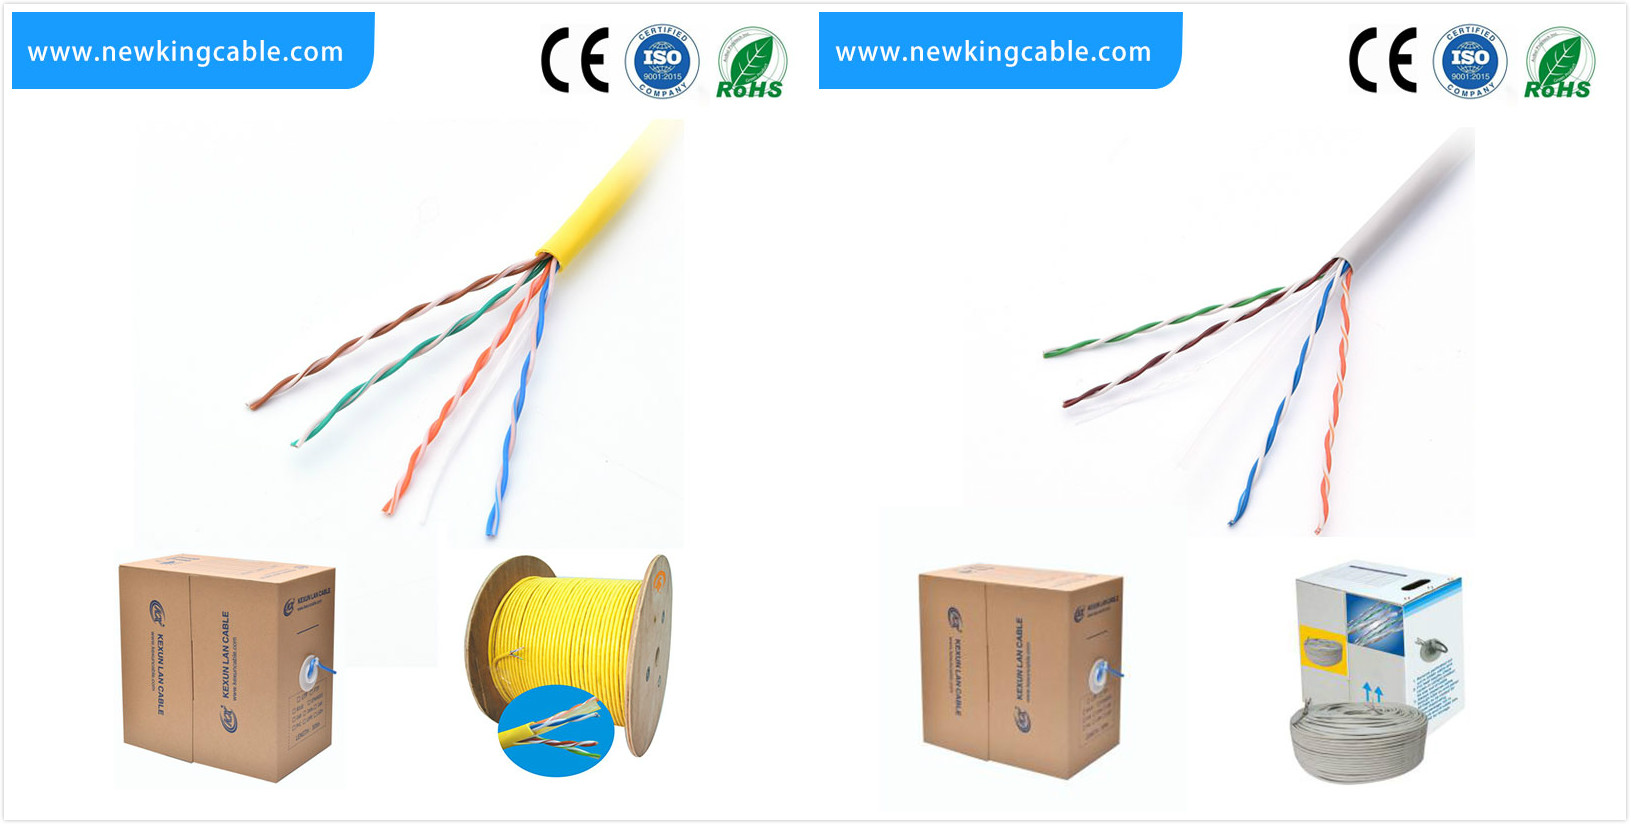 How To Choose The Right Ethernet Cable?